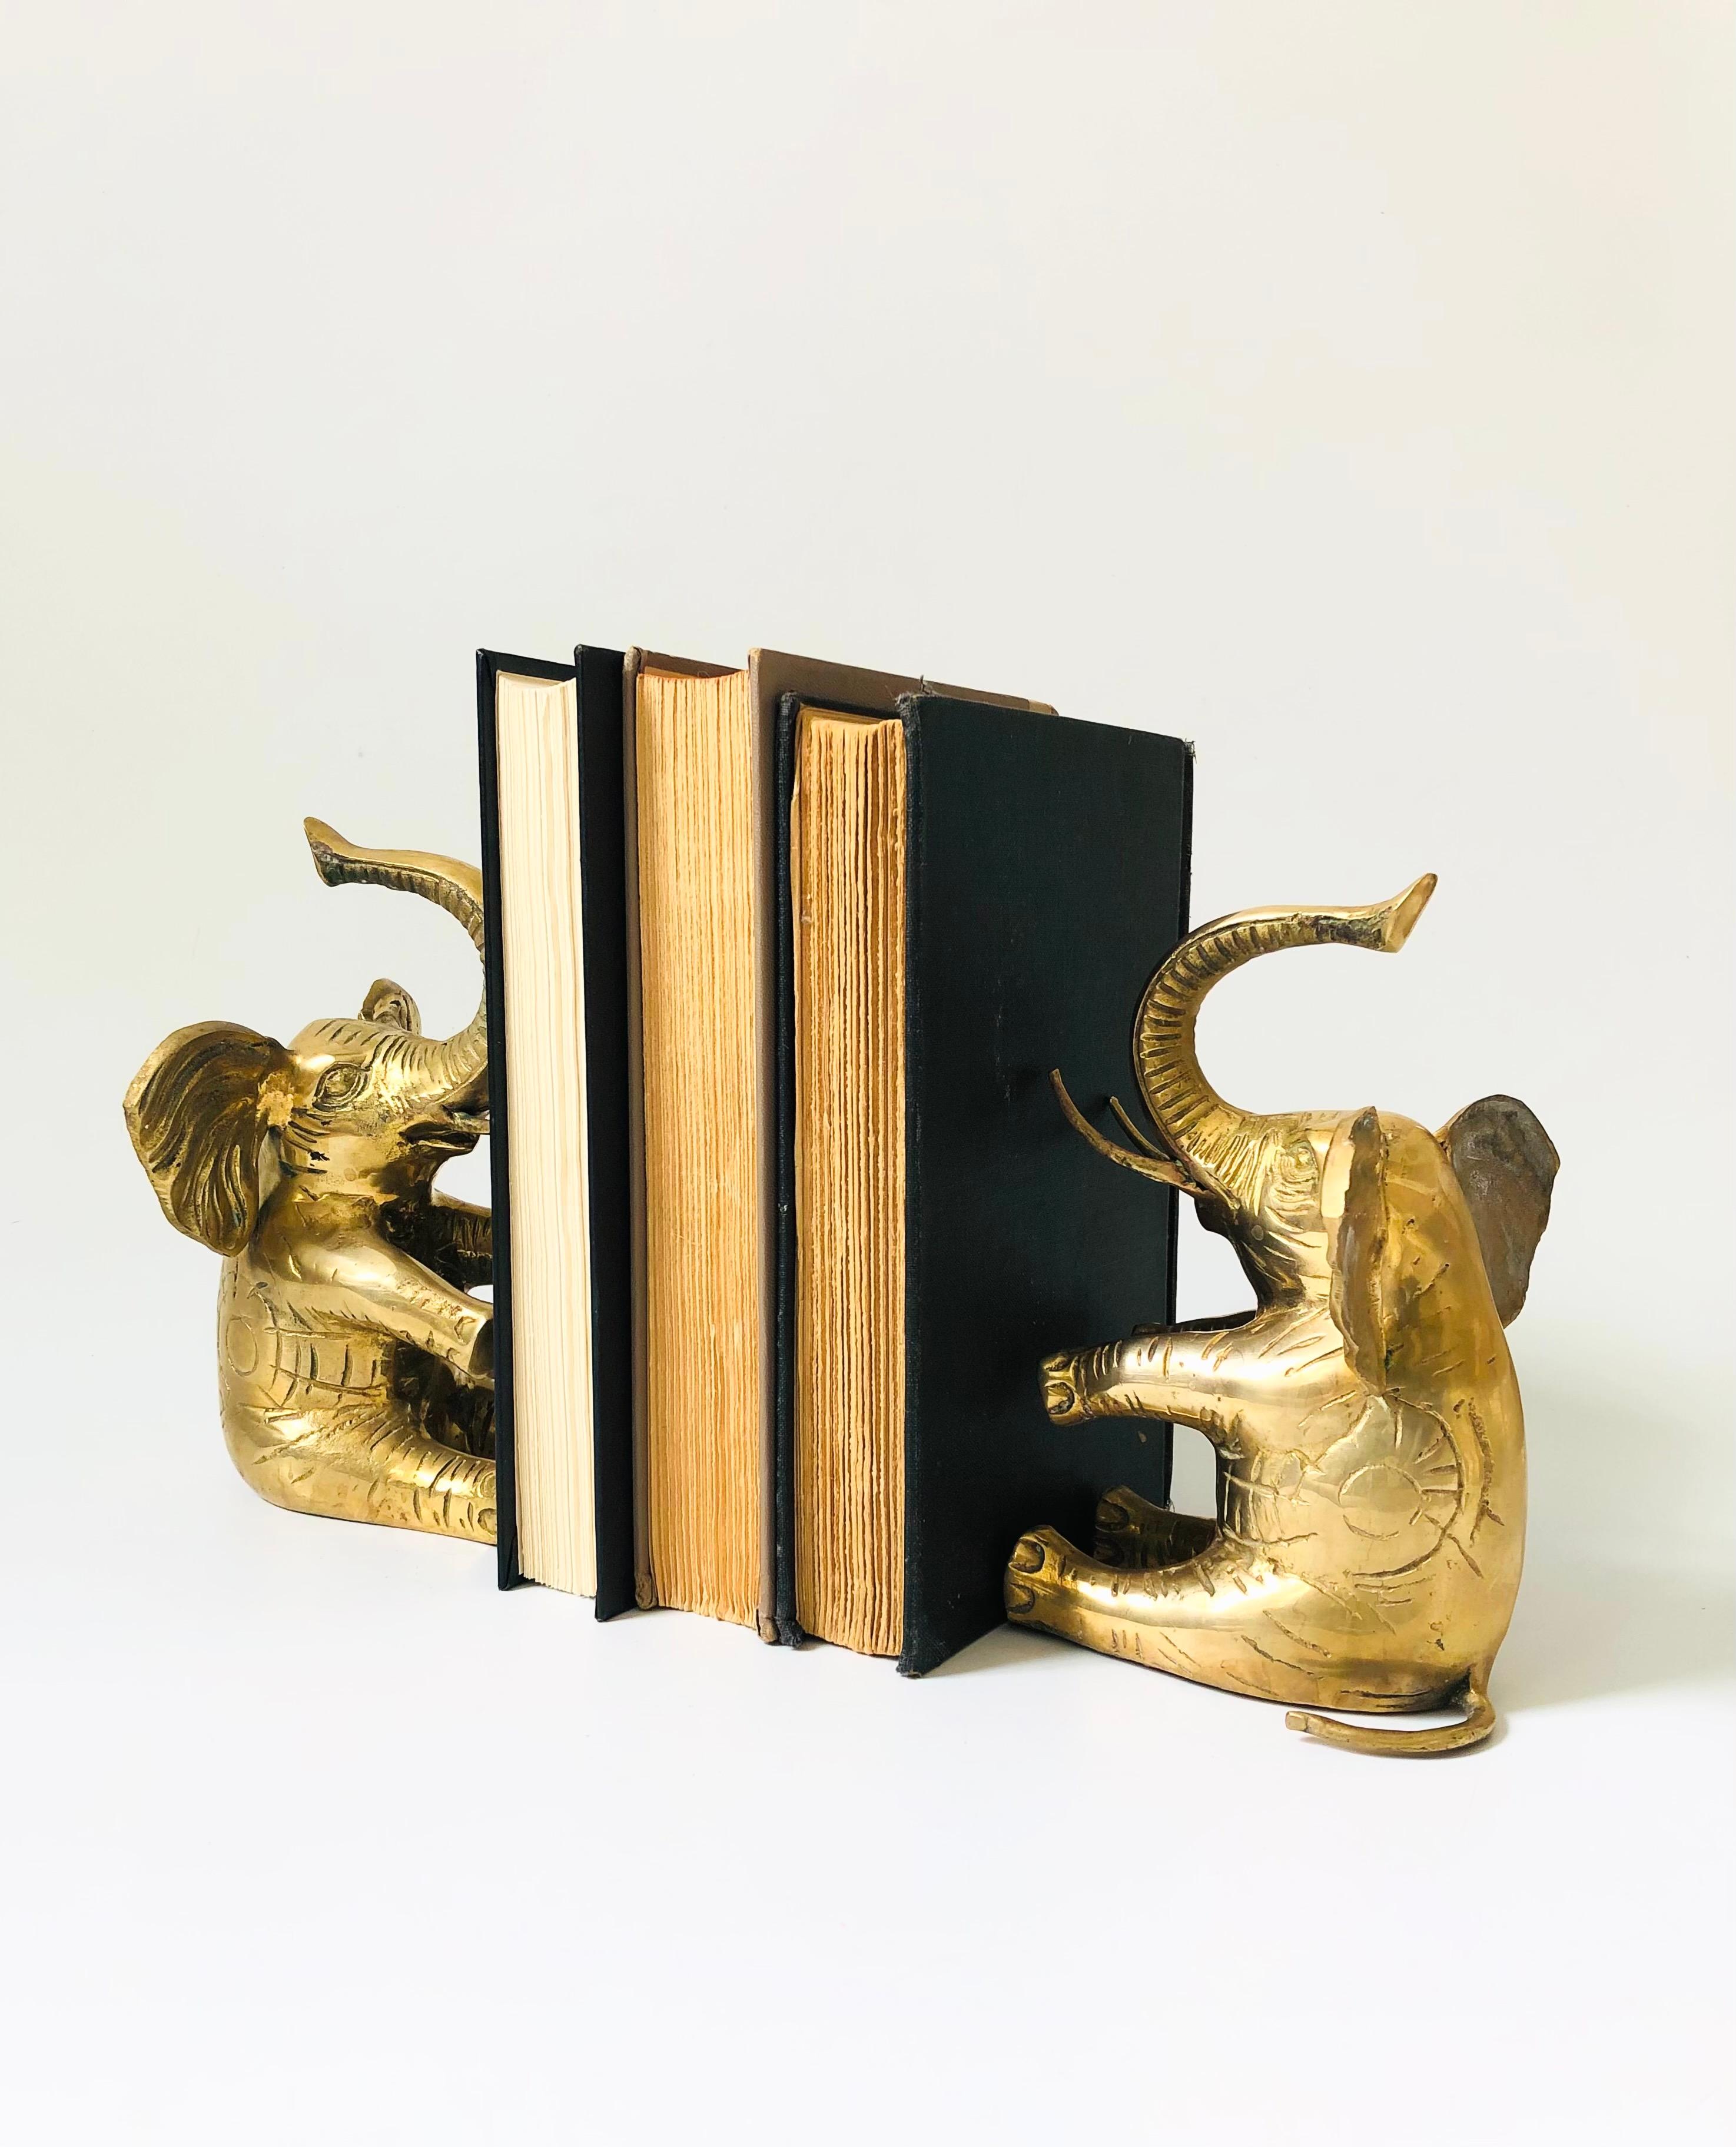 A wonderful pair of vintage brass bookends in the shape of elephants. Nice heavy weight. Beautiful details formed into the brass. Made in Korea.

